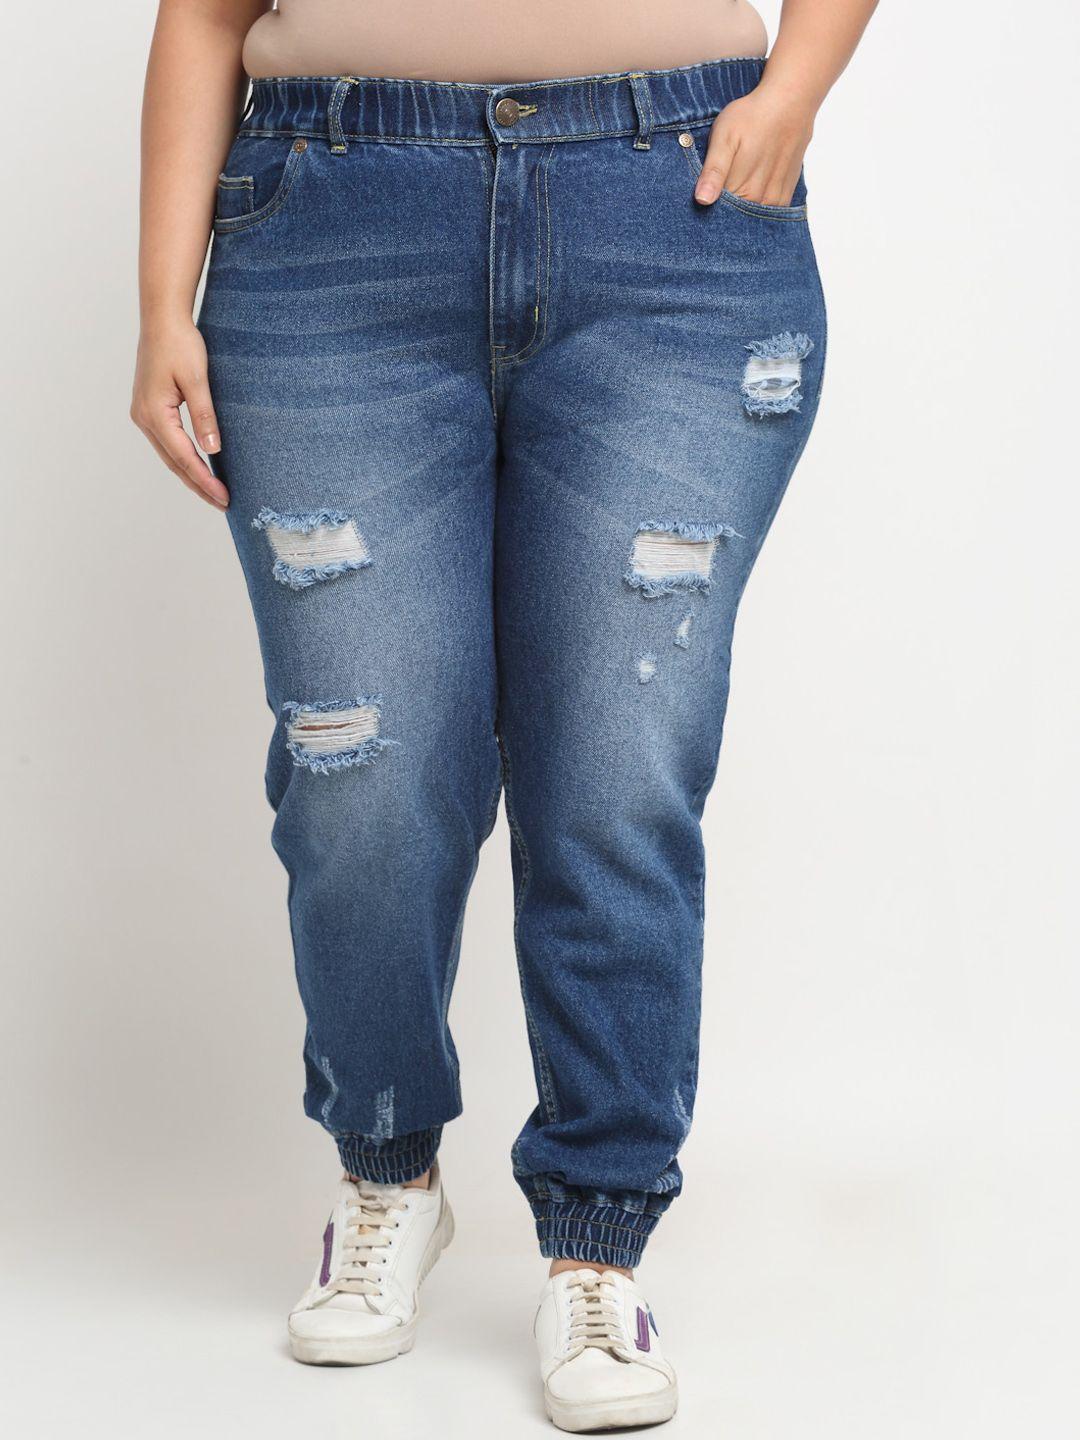 pluss-women-jogger-mildly-distressed-light-fade-stretchable-jeans